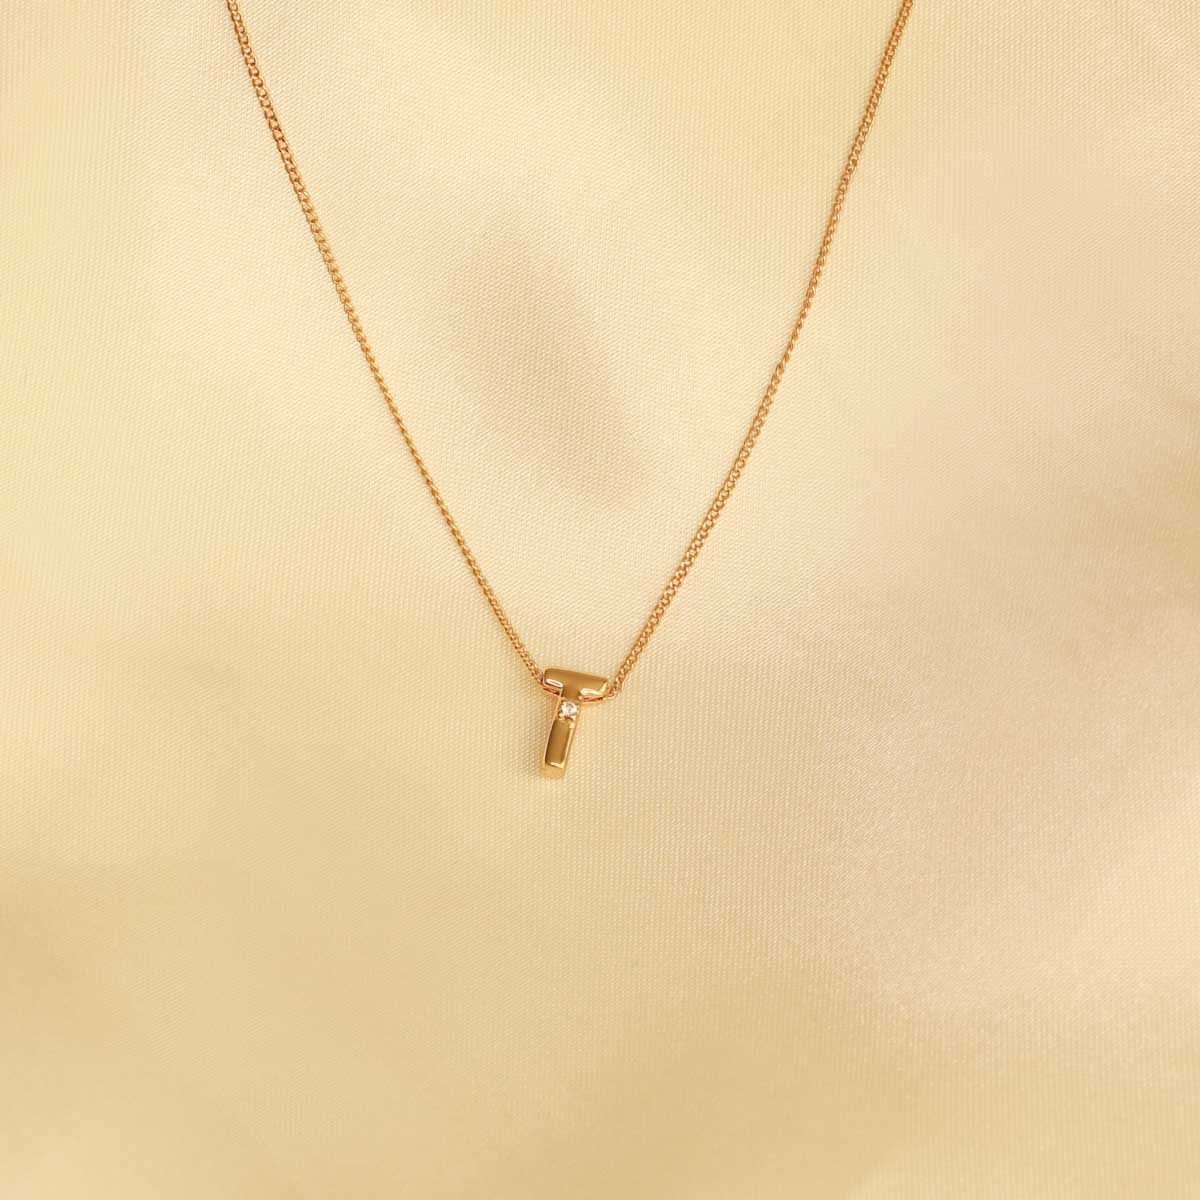 Flat lay shot of T Initial Pendant Necklace in Gold